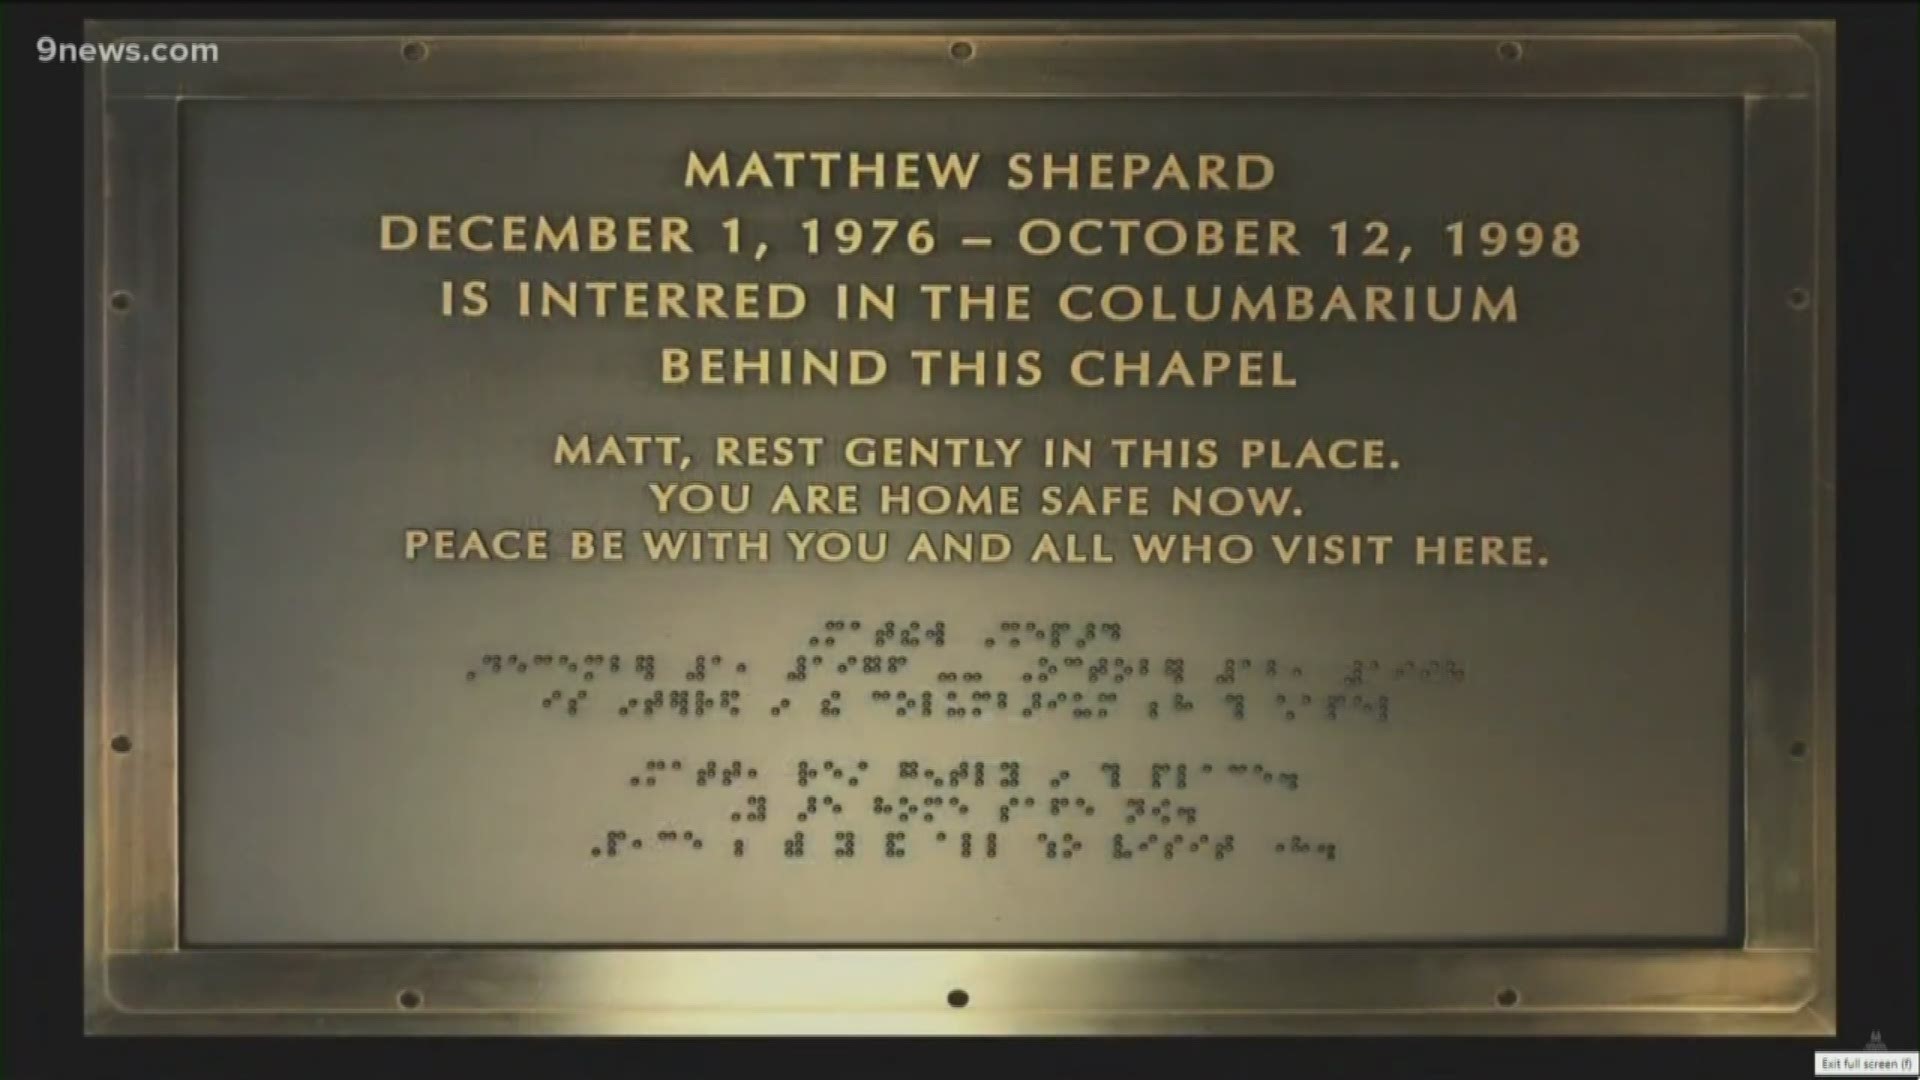 Matthew Shepard should have turned 43 on Dec. 1. Instead, he was brutally beaten and left to die in Laramie, Wyoming in 1998 -- targeted because he was gay.